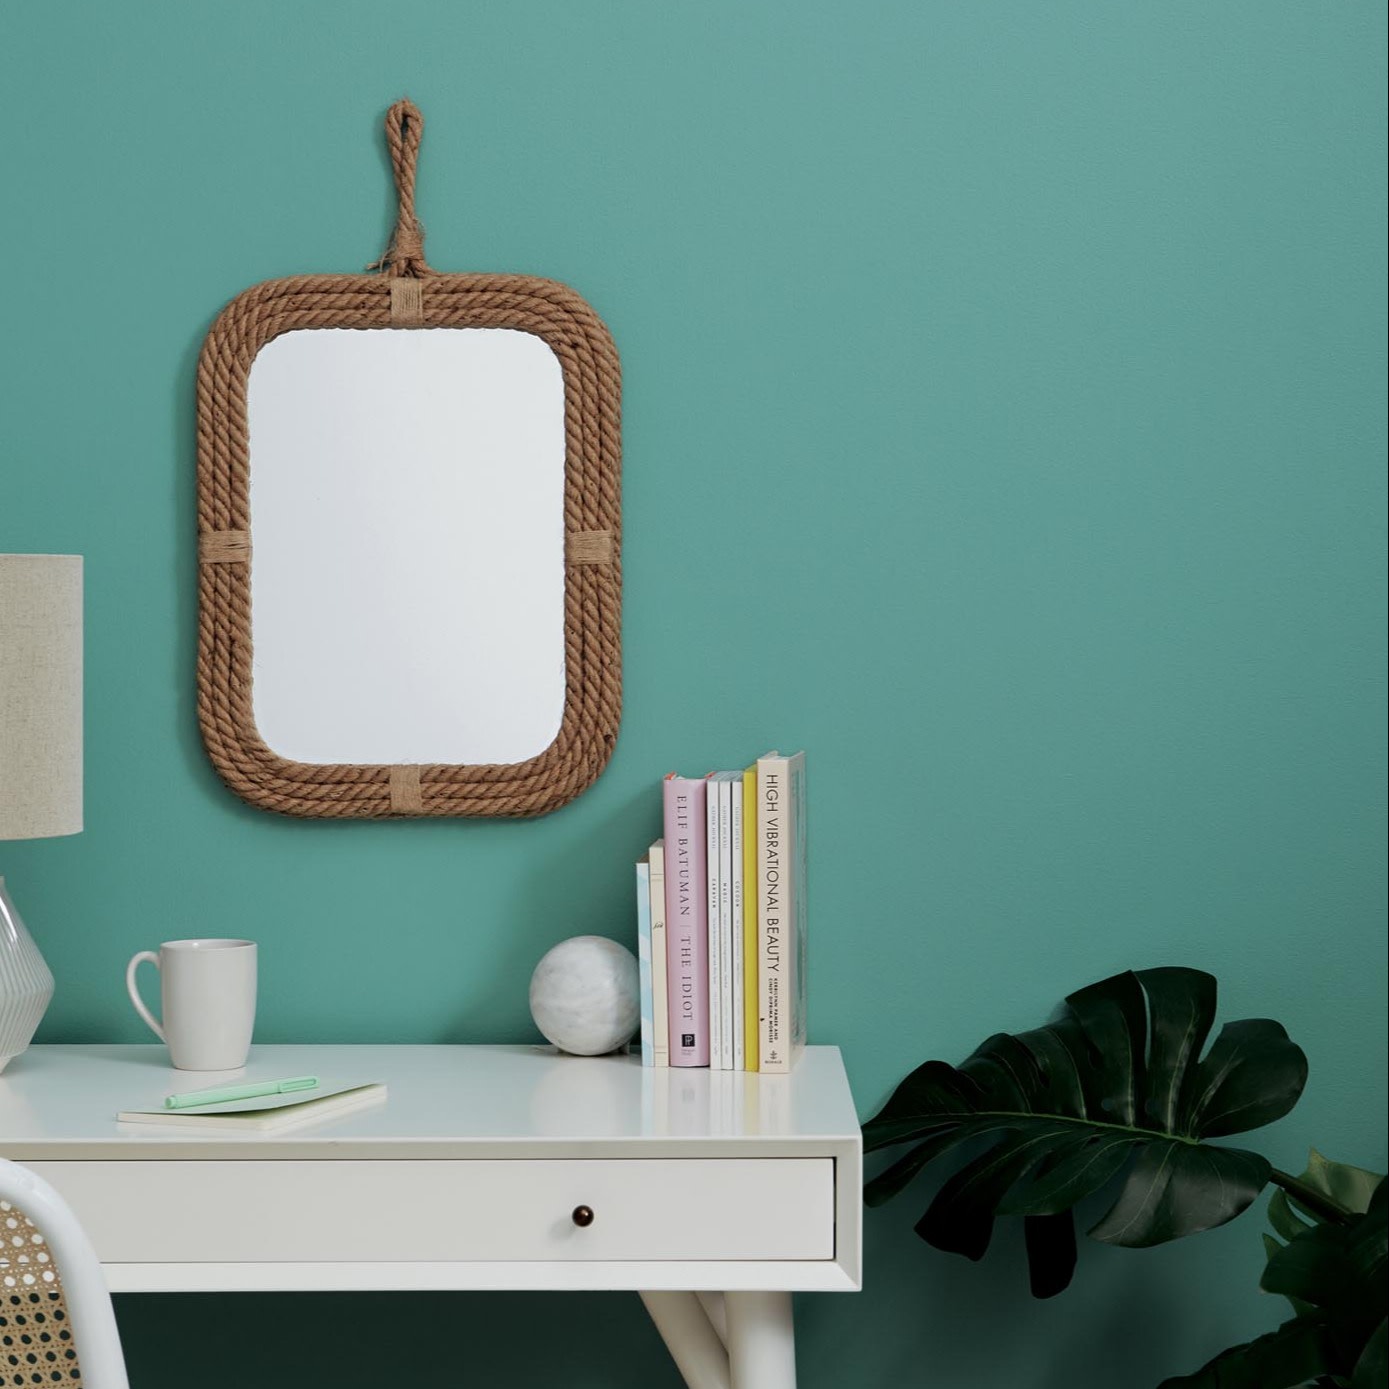 Vacay teal wall color Clare Paint vanity desk